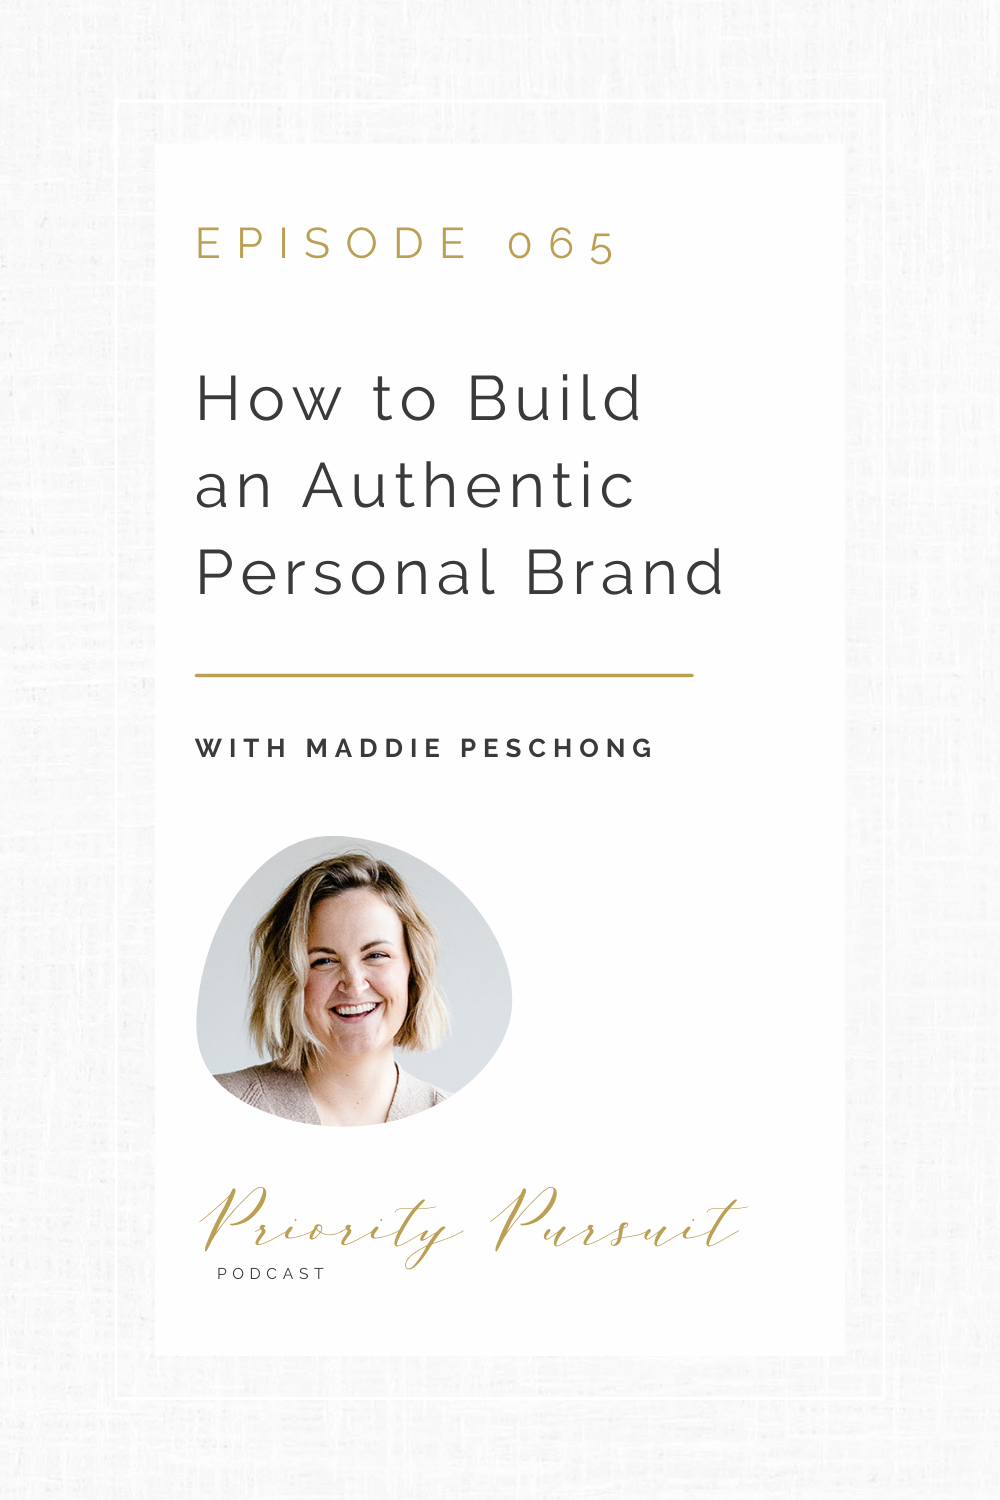 Victoria Rayburn and Maddie Peschong discuss how creative entrepreneurs can build an authentic personal brand.